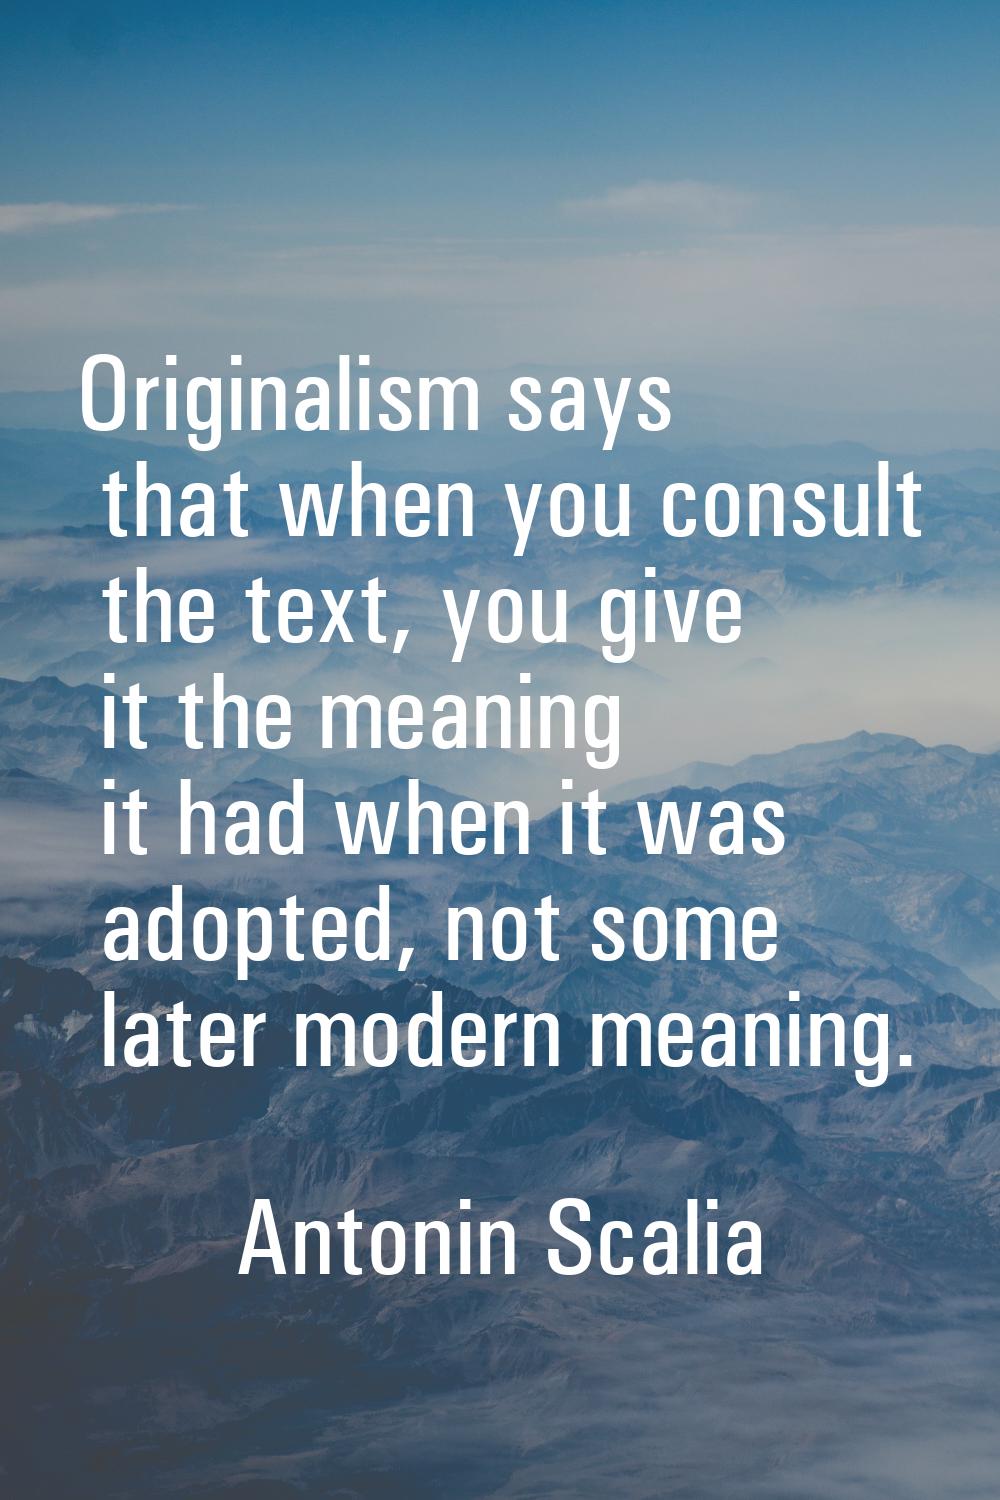 Originalism says that when you consult the text, you give it the meaning it had when it was adopted